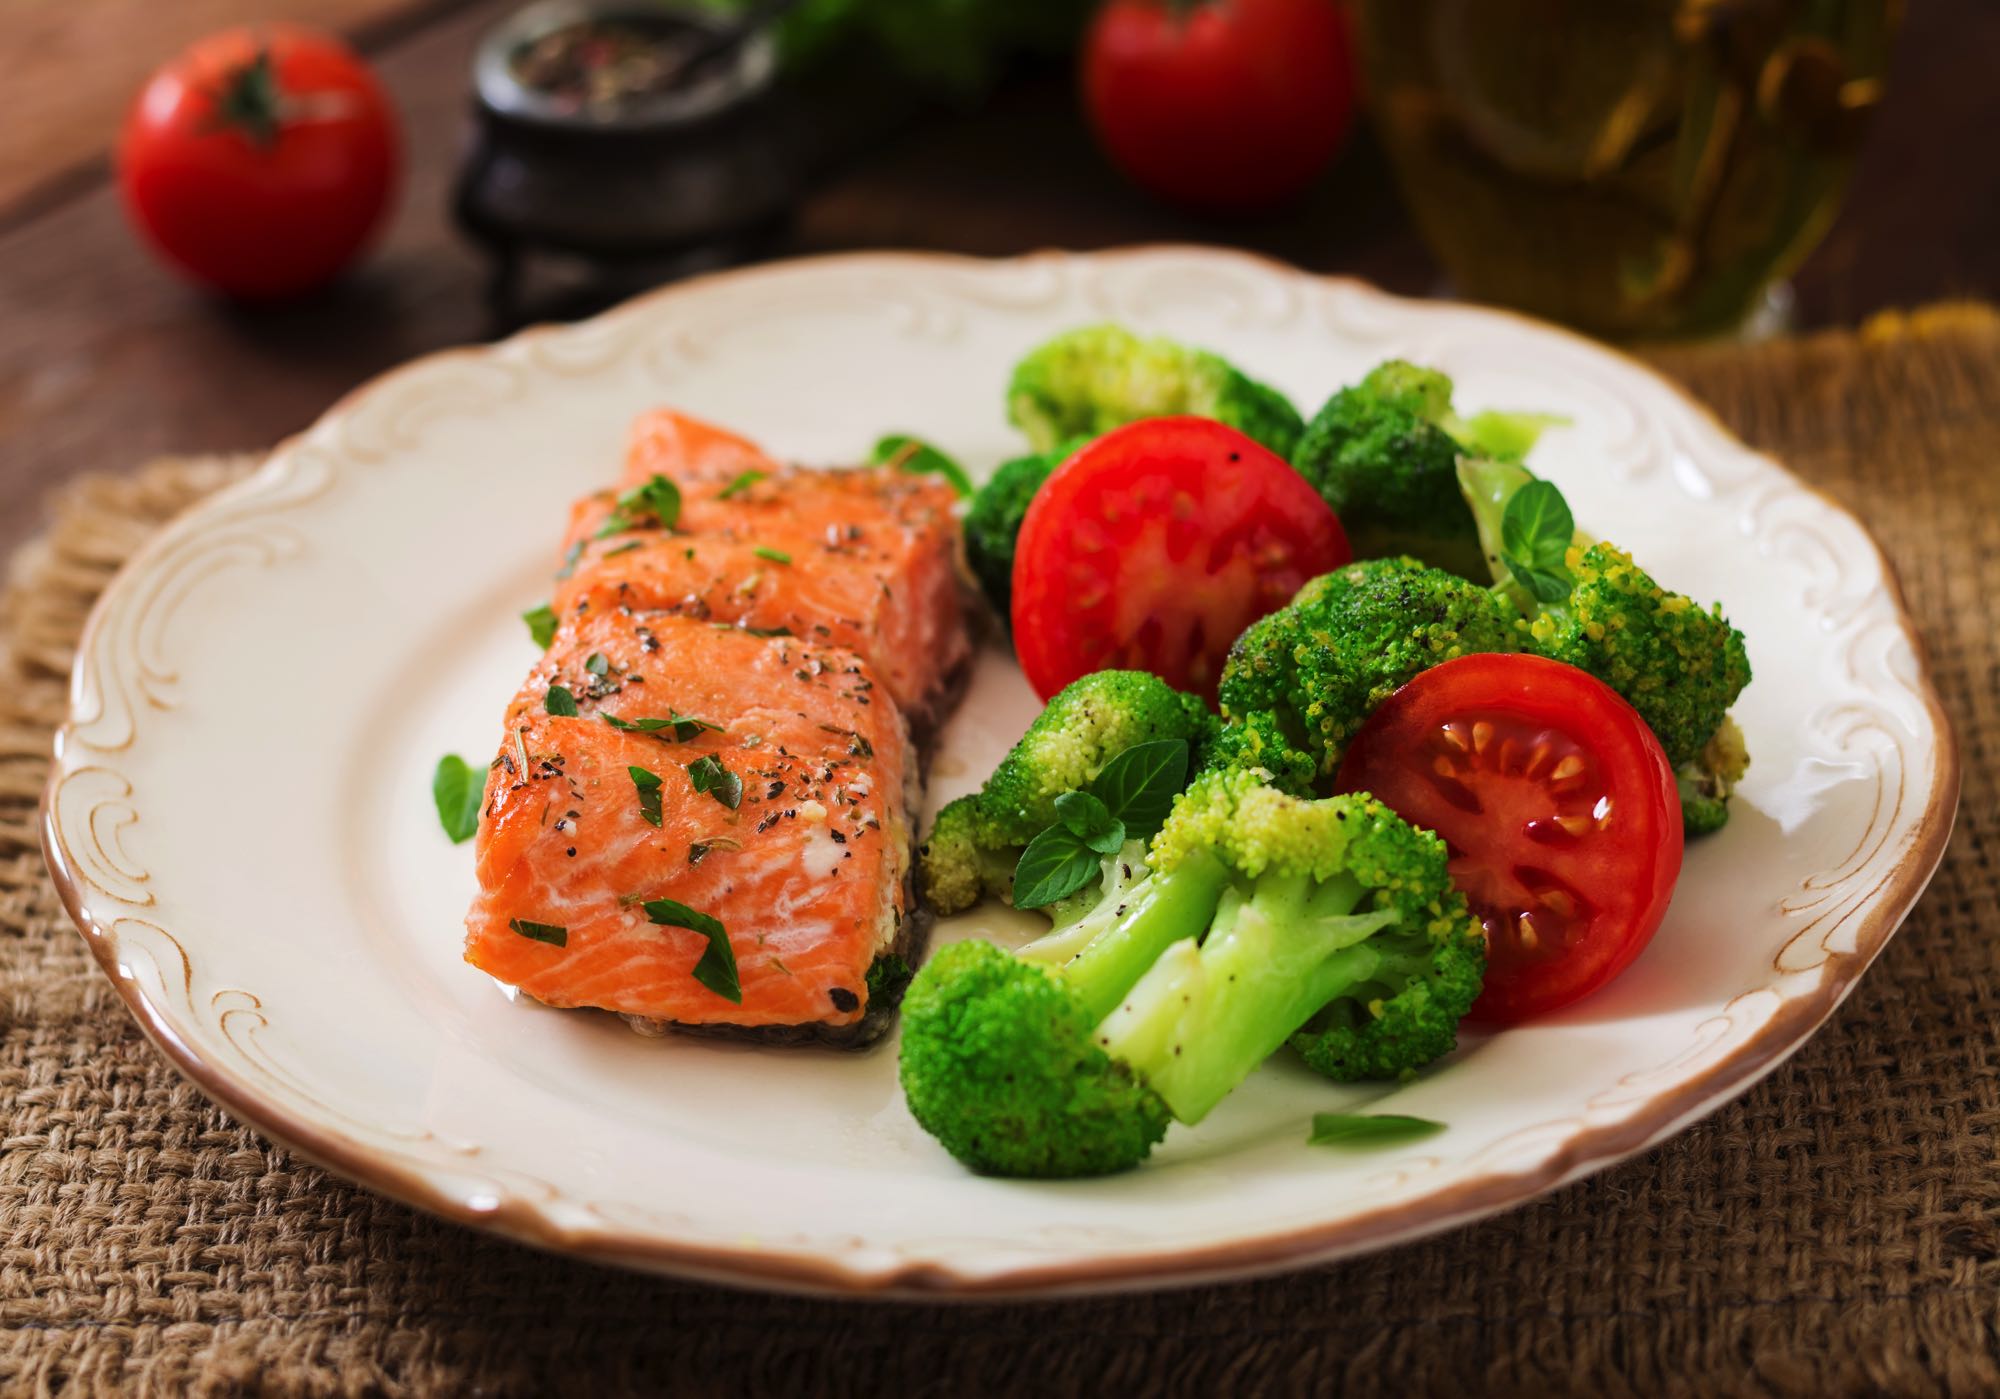 baked-fish-salmon-garnished-with-broccoli-and-toma-PBKGZRK.jpg